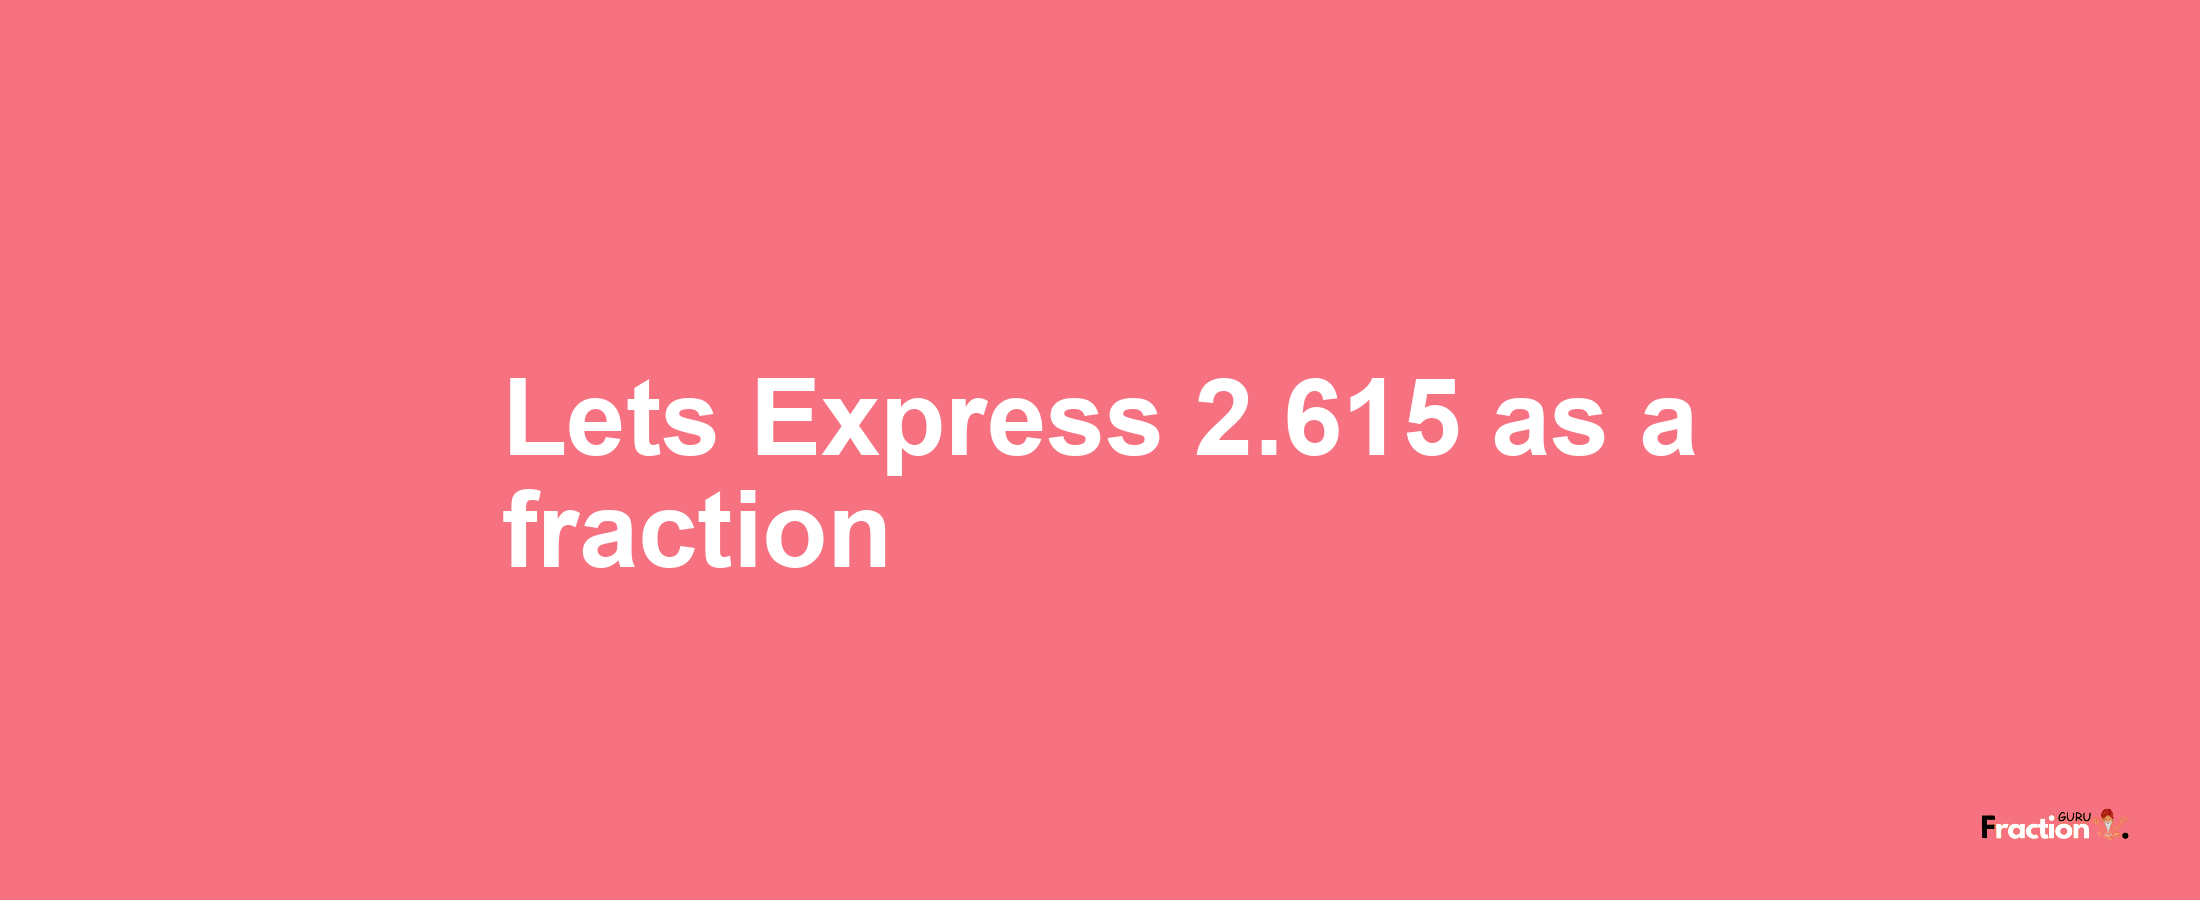 Lets Express 2.615 as afraction